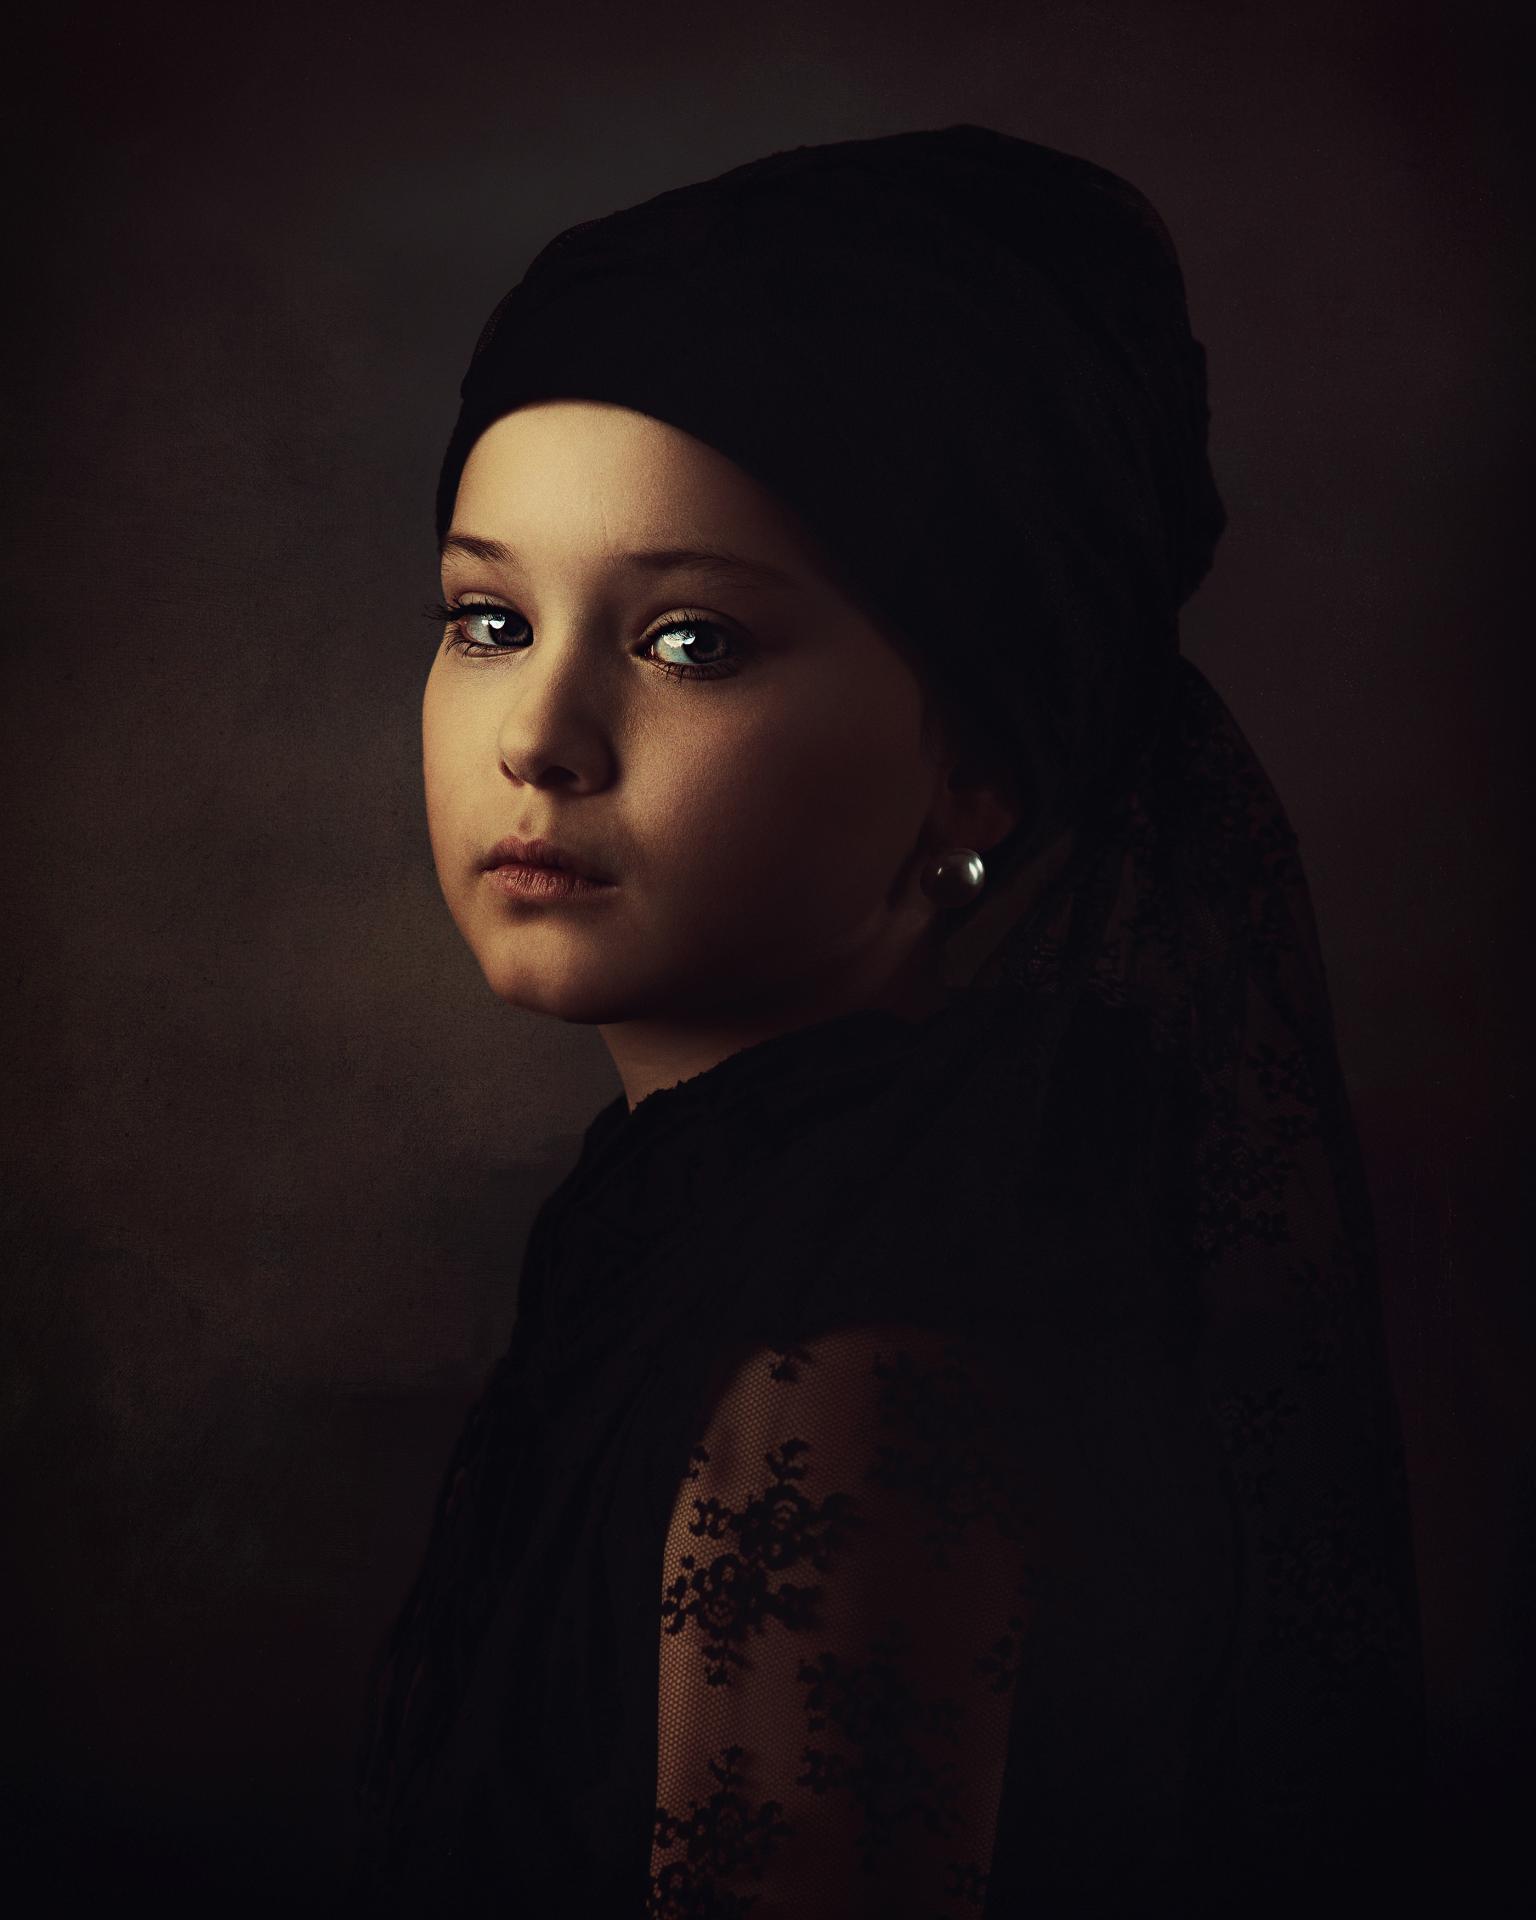 New York Photography Awards Winner - Sister of the Girl with a Pearl Earring